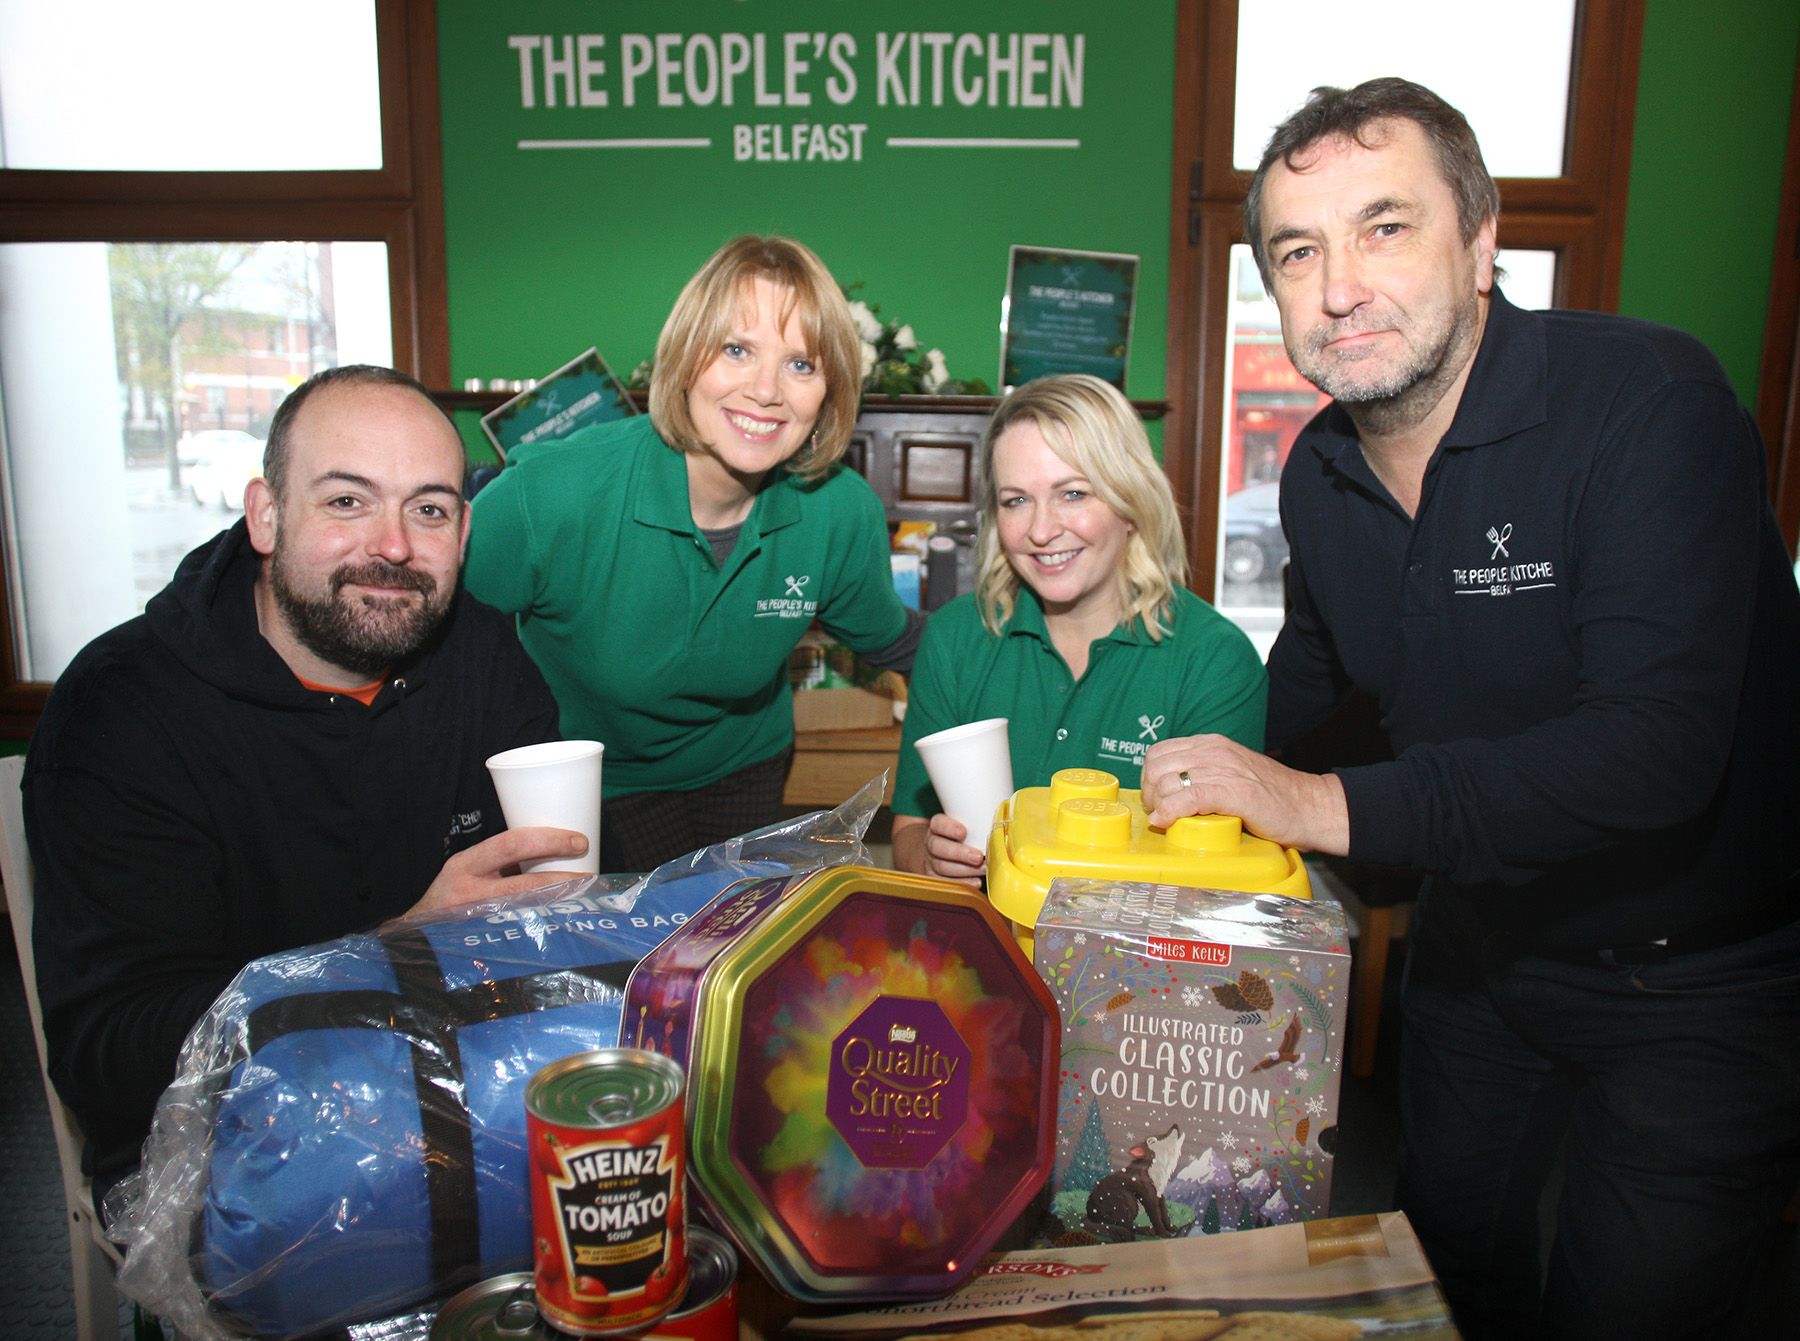 CHRISTMAS APPEAL LAUNCH: Paul McCusker, Nuala McKeever, Deborah McAleese (UTV) and Damian McNairney, launch the People\'s Kitchen Christmas appeal